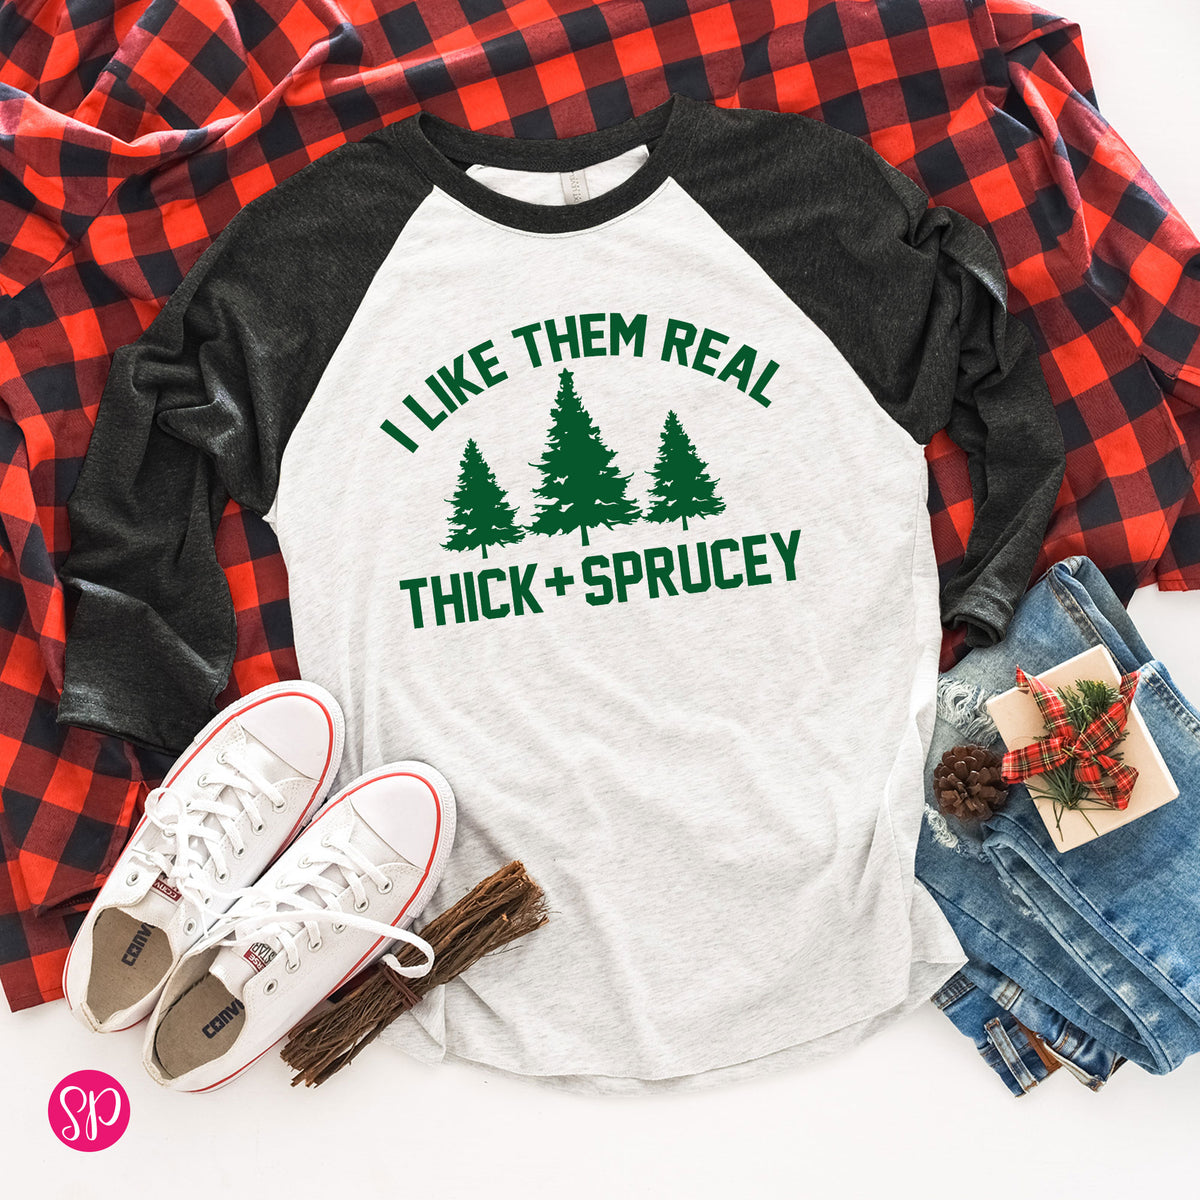 I Like Them Real Thick and Sprucy Christmas Holidays Raglan Graphic Tee for Women